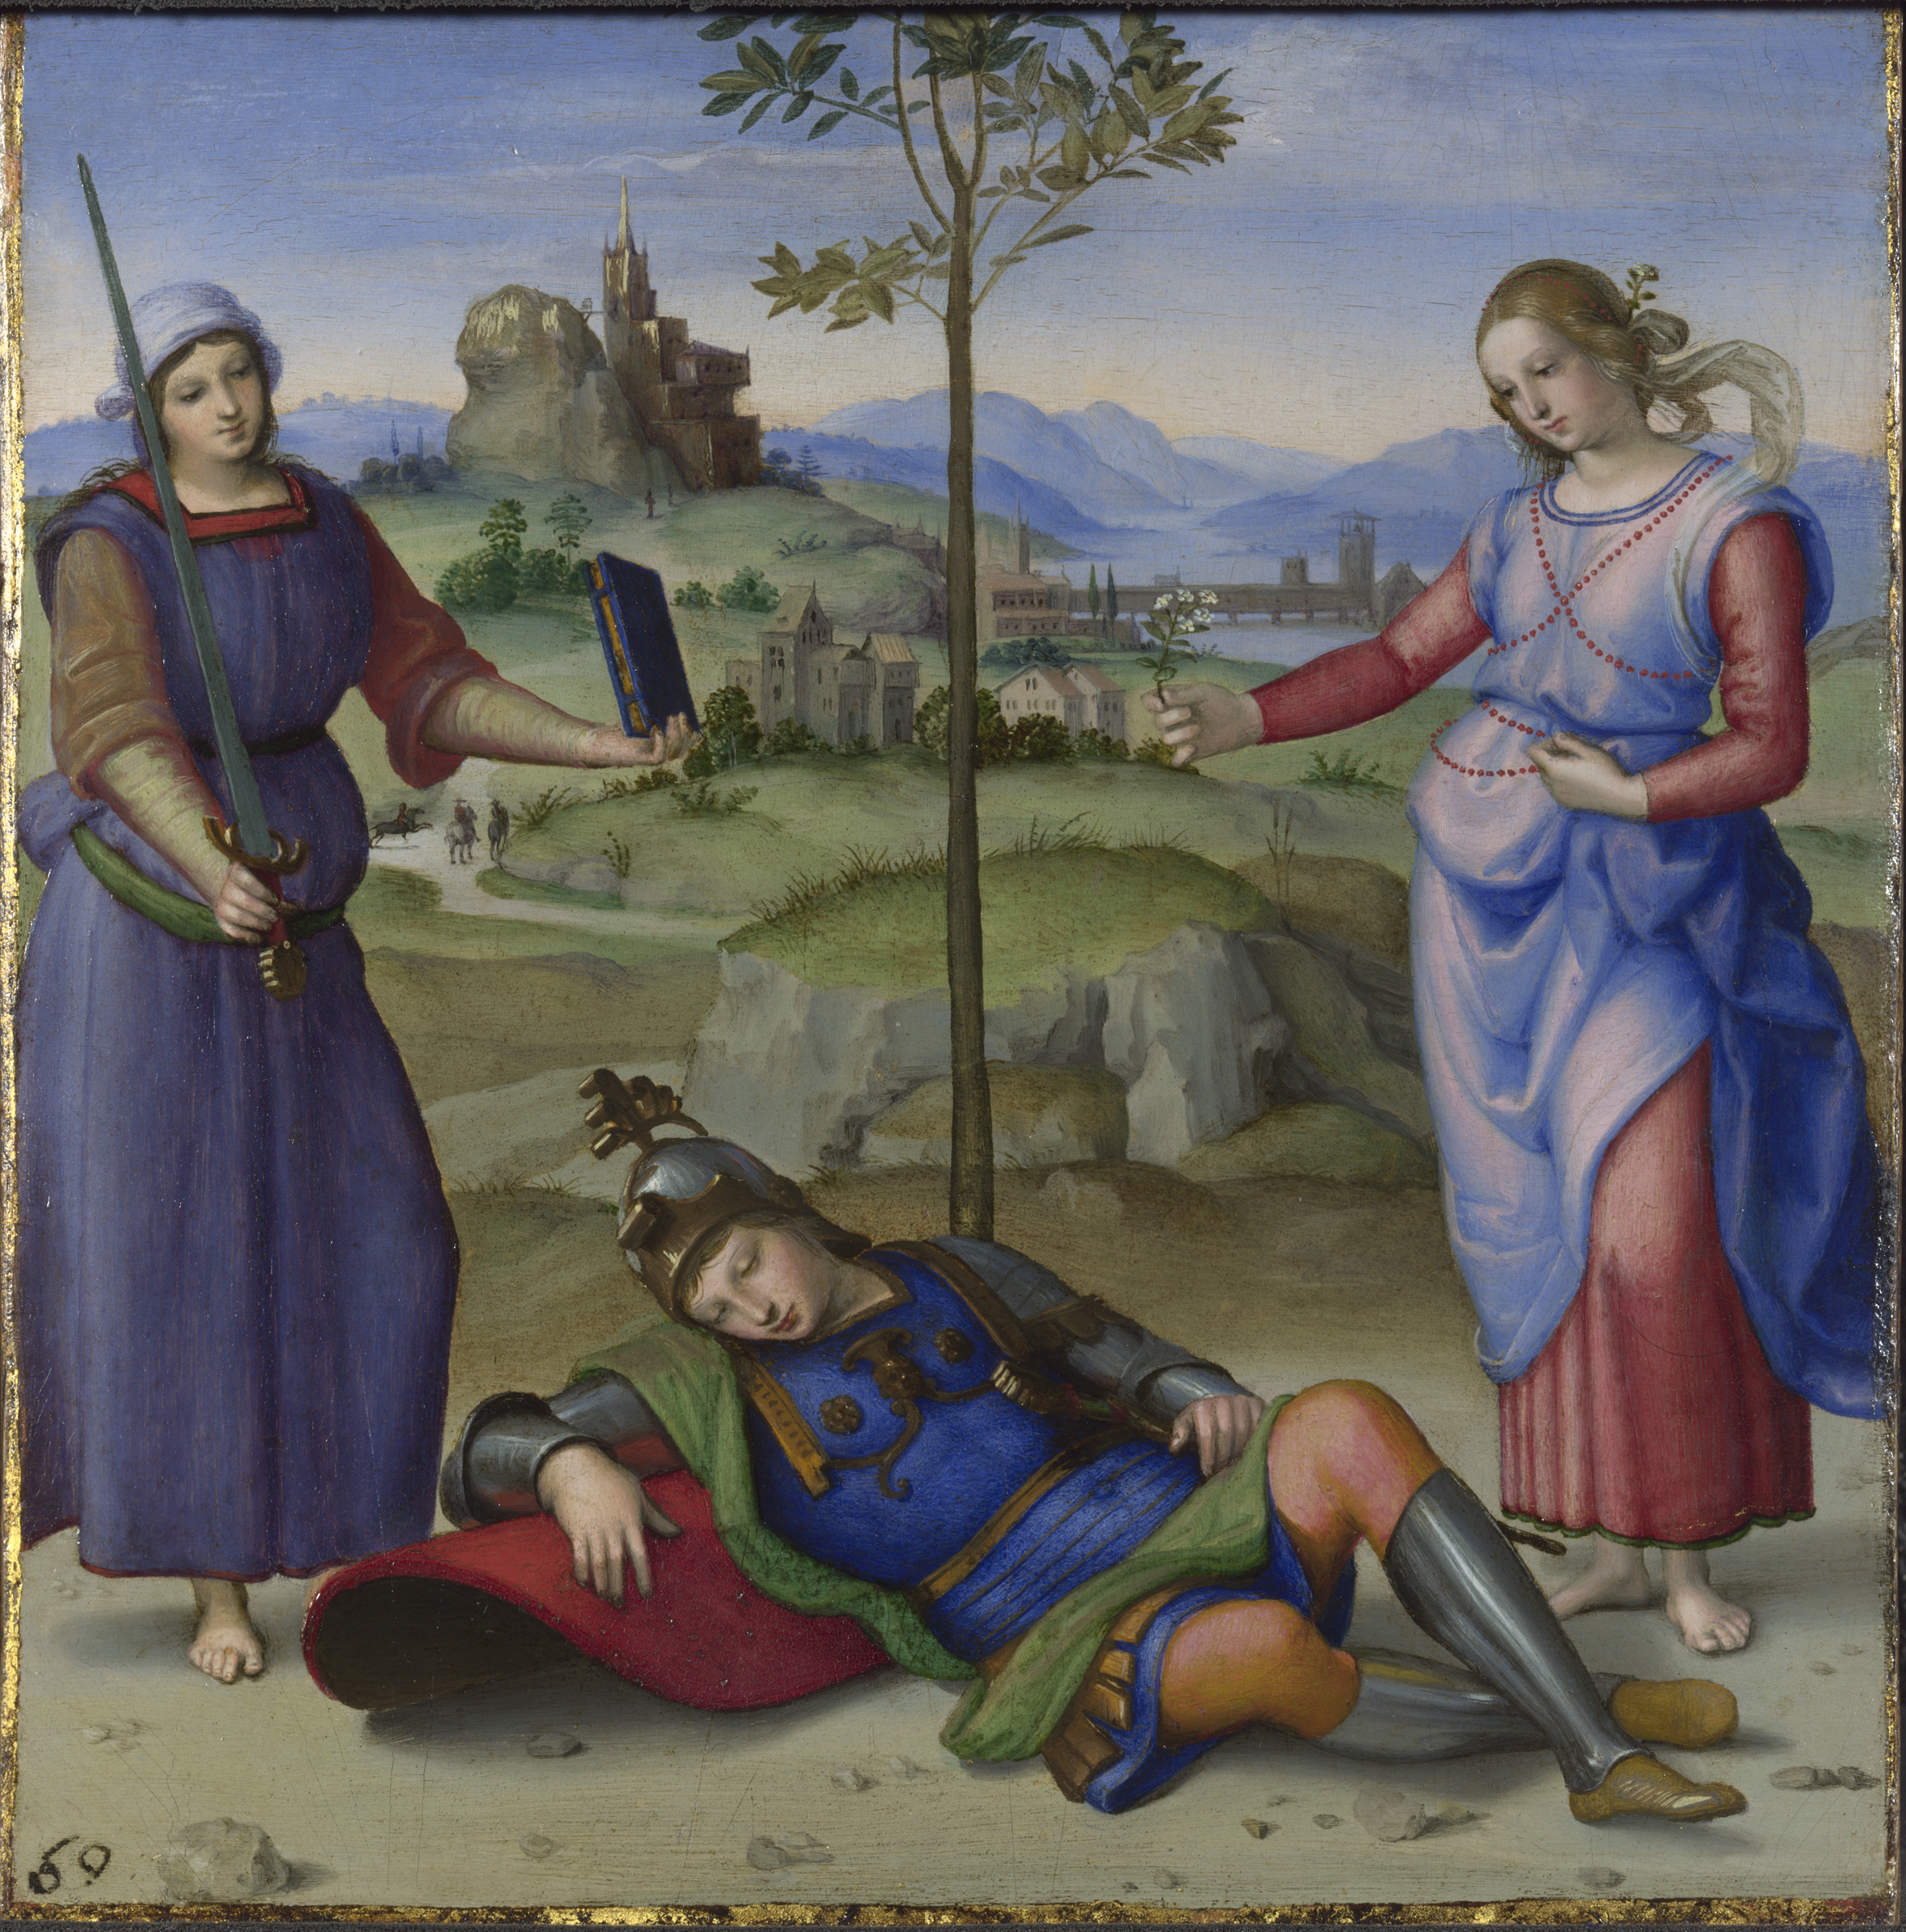 Raphael, An Allegory ('Vision of a Knight'), about 1504, Oil on poplar, 17.1 x 17.3 cm, © The National Gallery, London